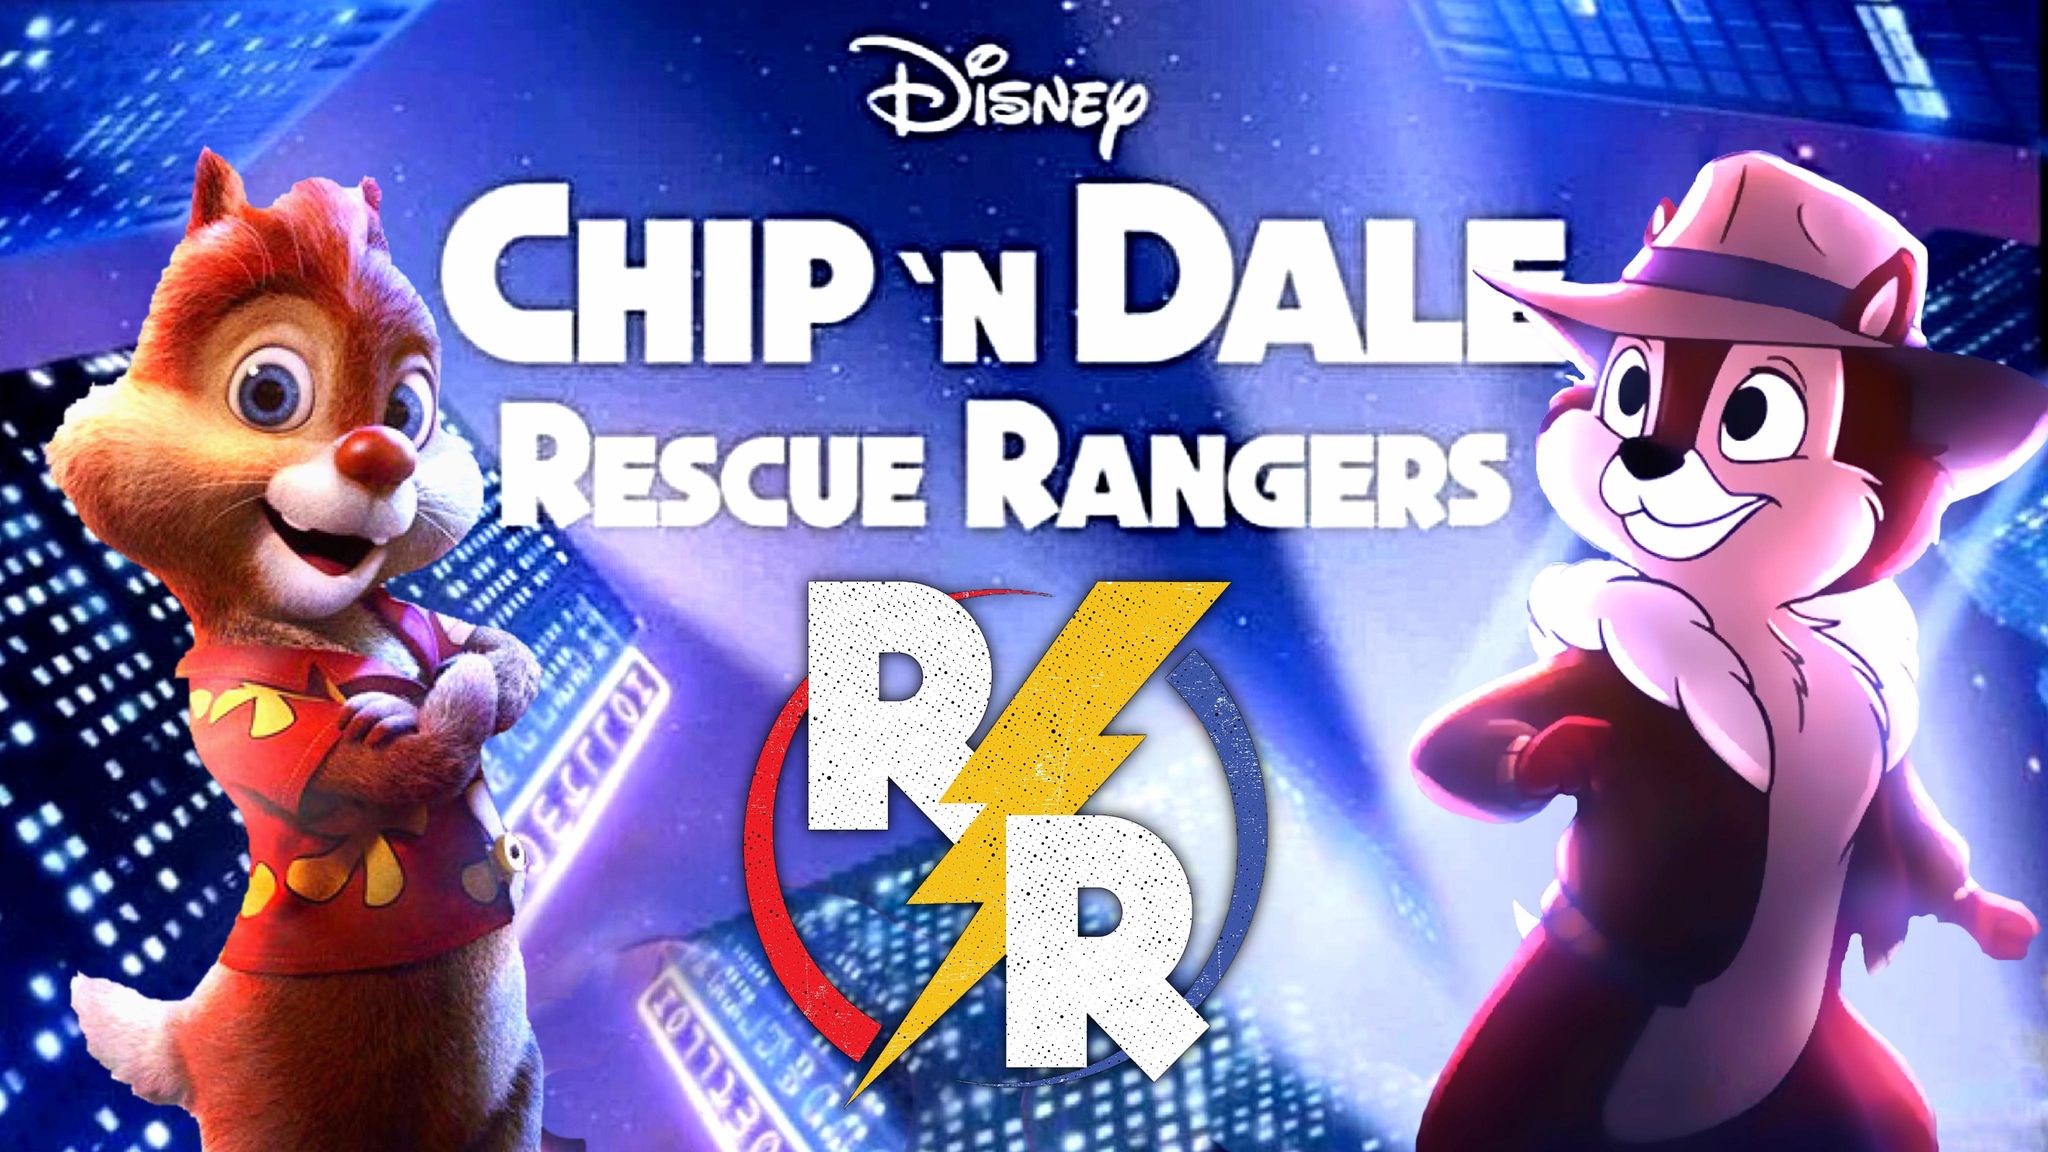 Snyderverse restored in Chip 'n' Dale: Rescue Rangers.